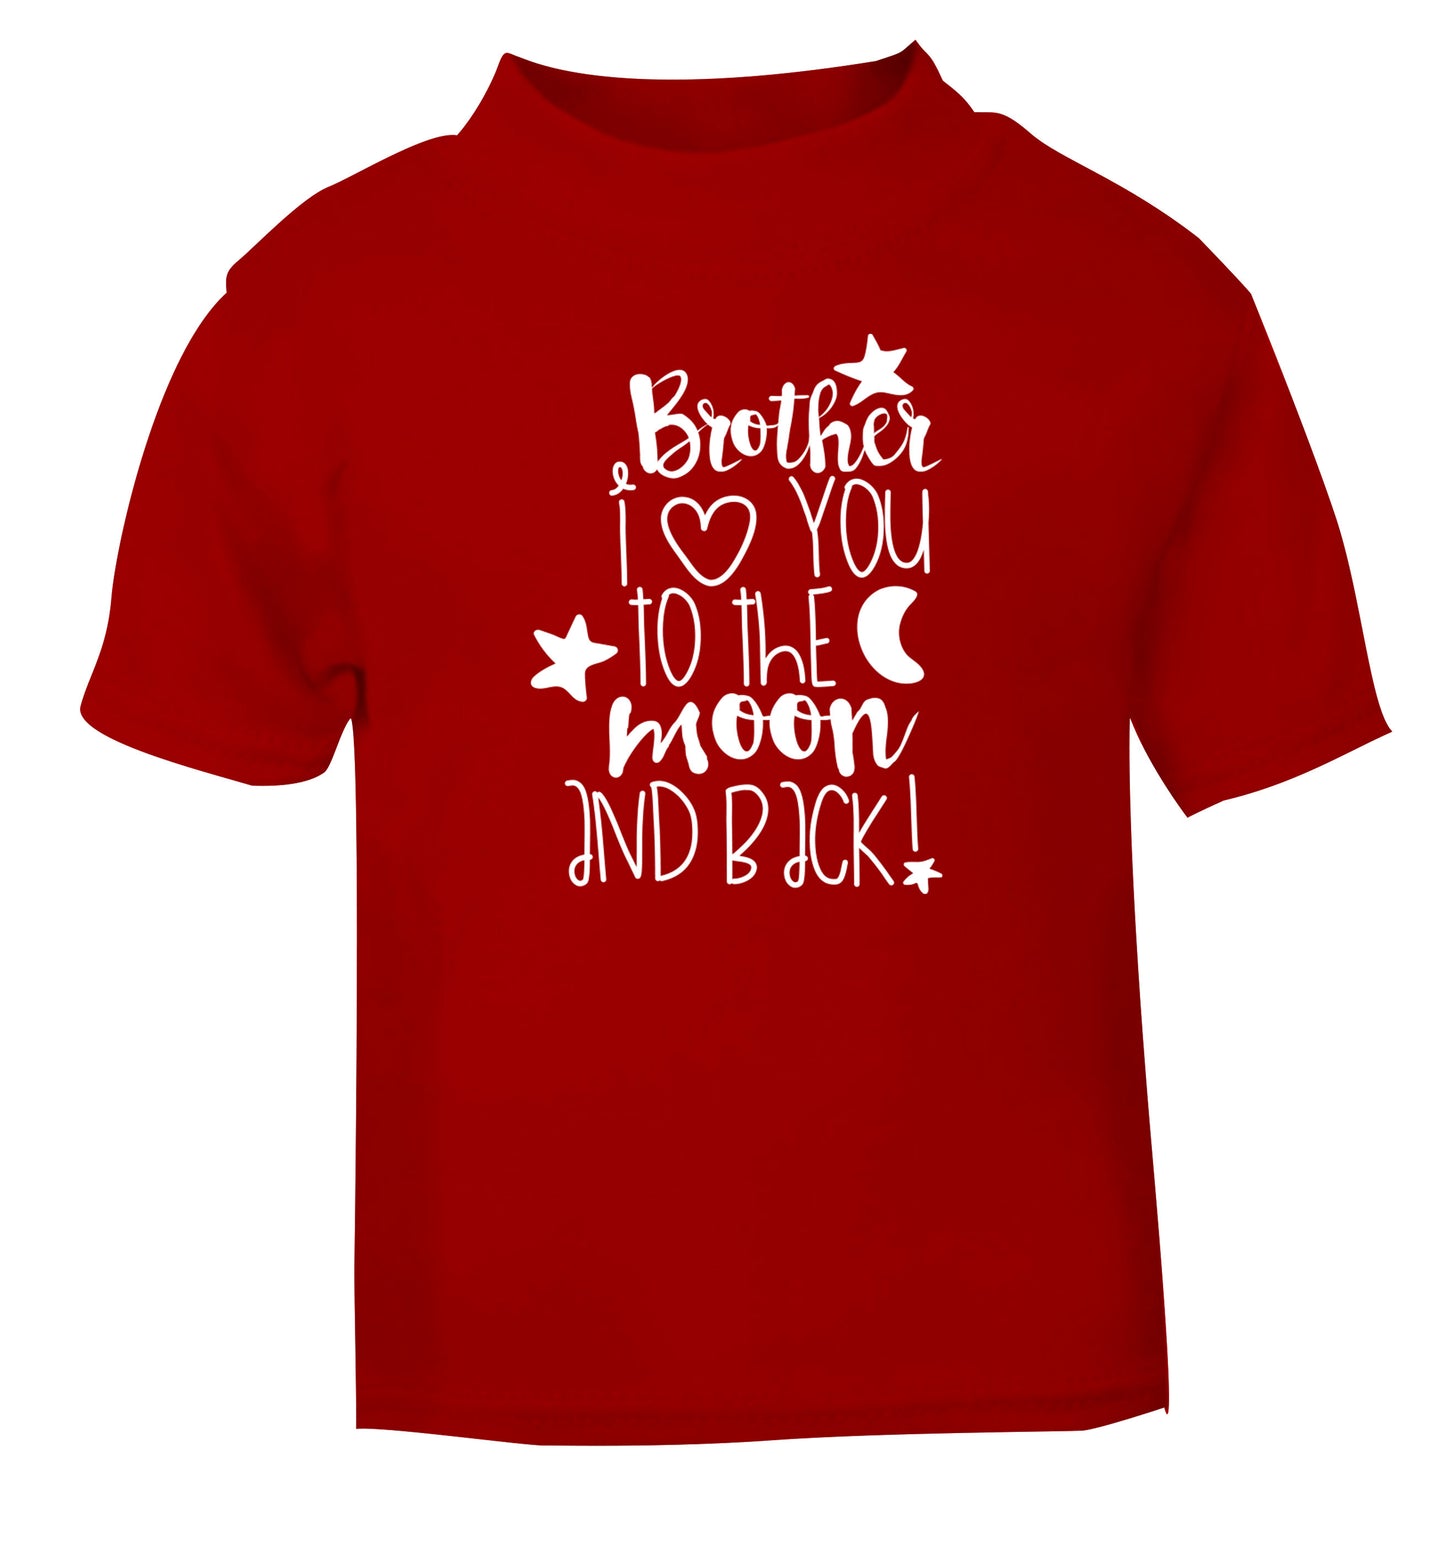 Brother I love you to the moon and back red Baby Toddler Tshirt 2 Years